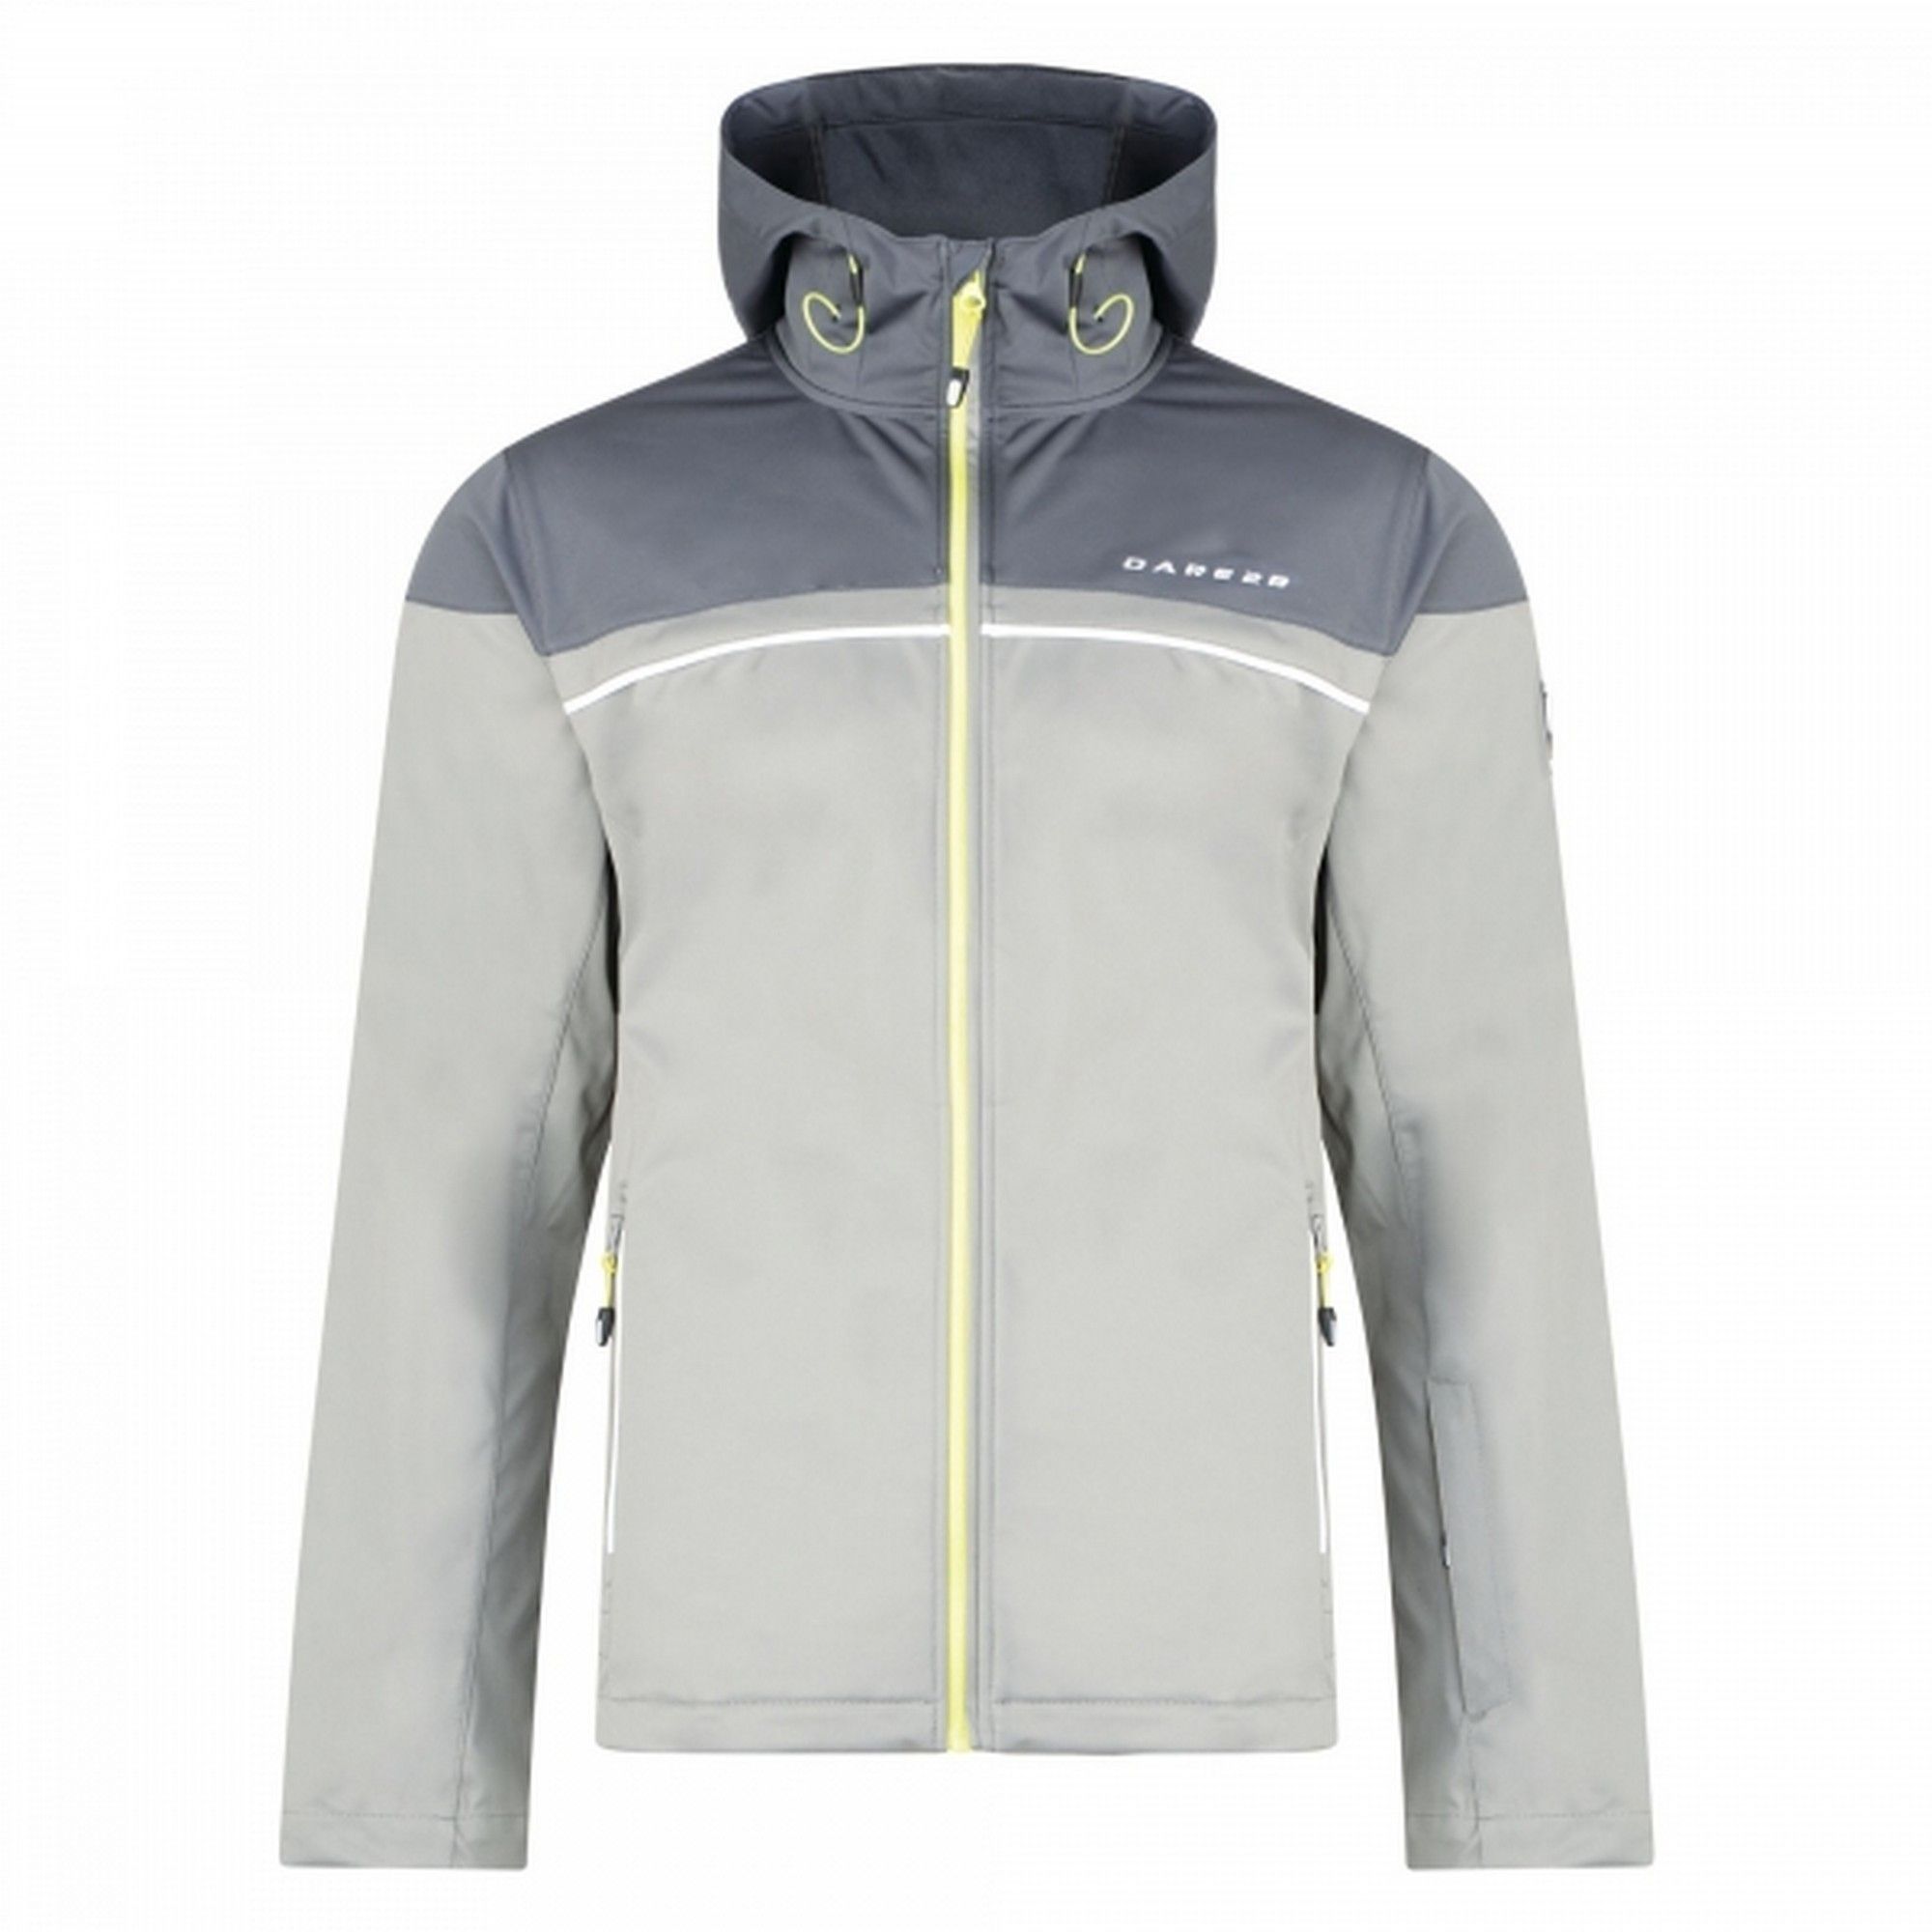 100% Polyester. Mens softshell jacket made of Ilus D-lab lightweight Polyester/Elastane fabric. Windproof membrane. Fabric waterproof up to 10,000mm. Breathability rating 5,000/m2/24hrs. Water repellent finish. Grown on hood with adjusters. Underarm ventilation zips. Inner zip and chin guard. Part elasticated cuffs. 2 x lower zip pockets. 1 x ski pass zip pocket. Warm scrim pocket lining. Adjustable shockcord hem. Ideal for wearing outdoors on a cold day.